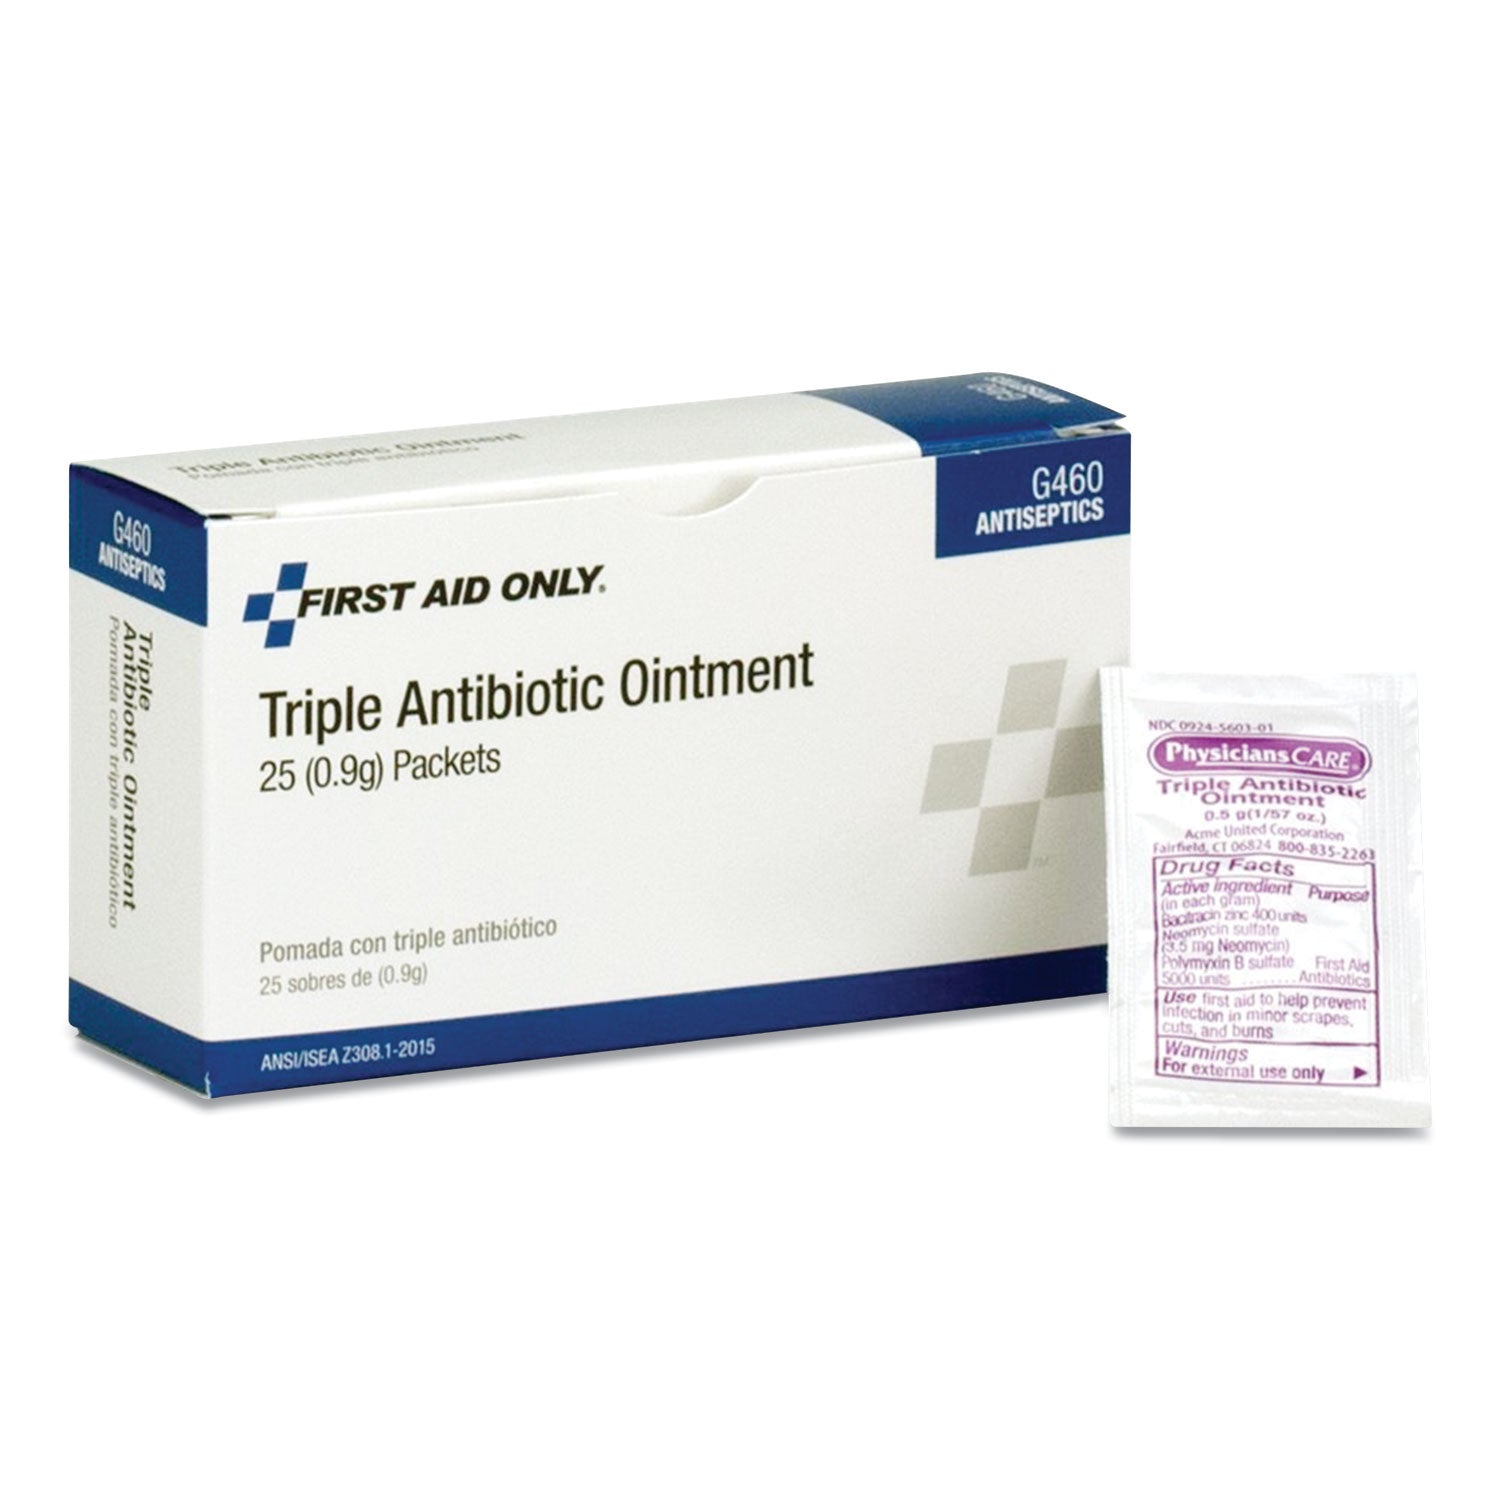 triple-antibiotic-ointment-003-oz-packet-25-box_faog460 - 1